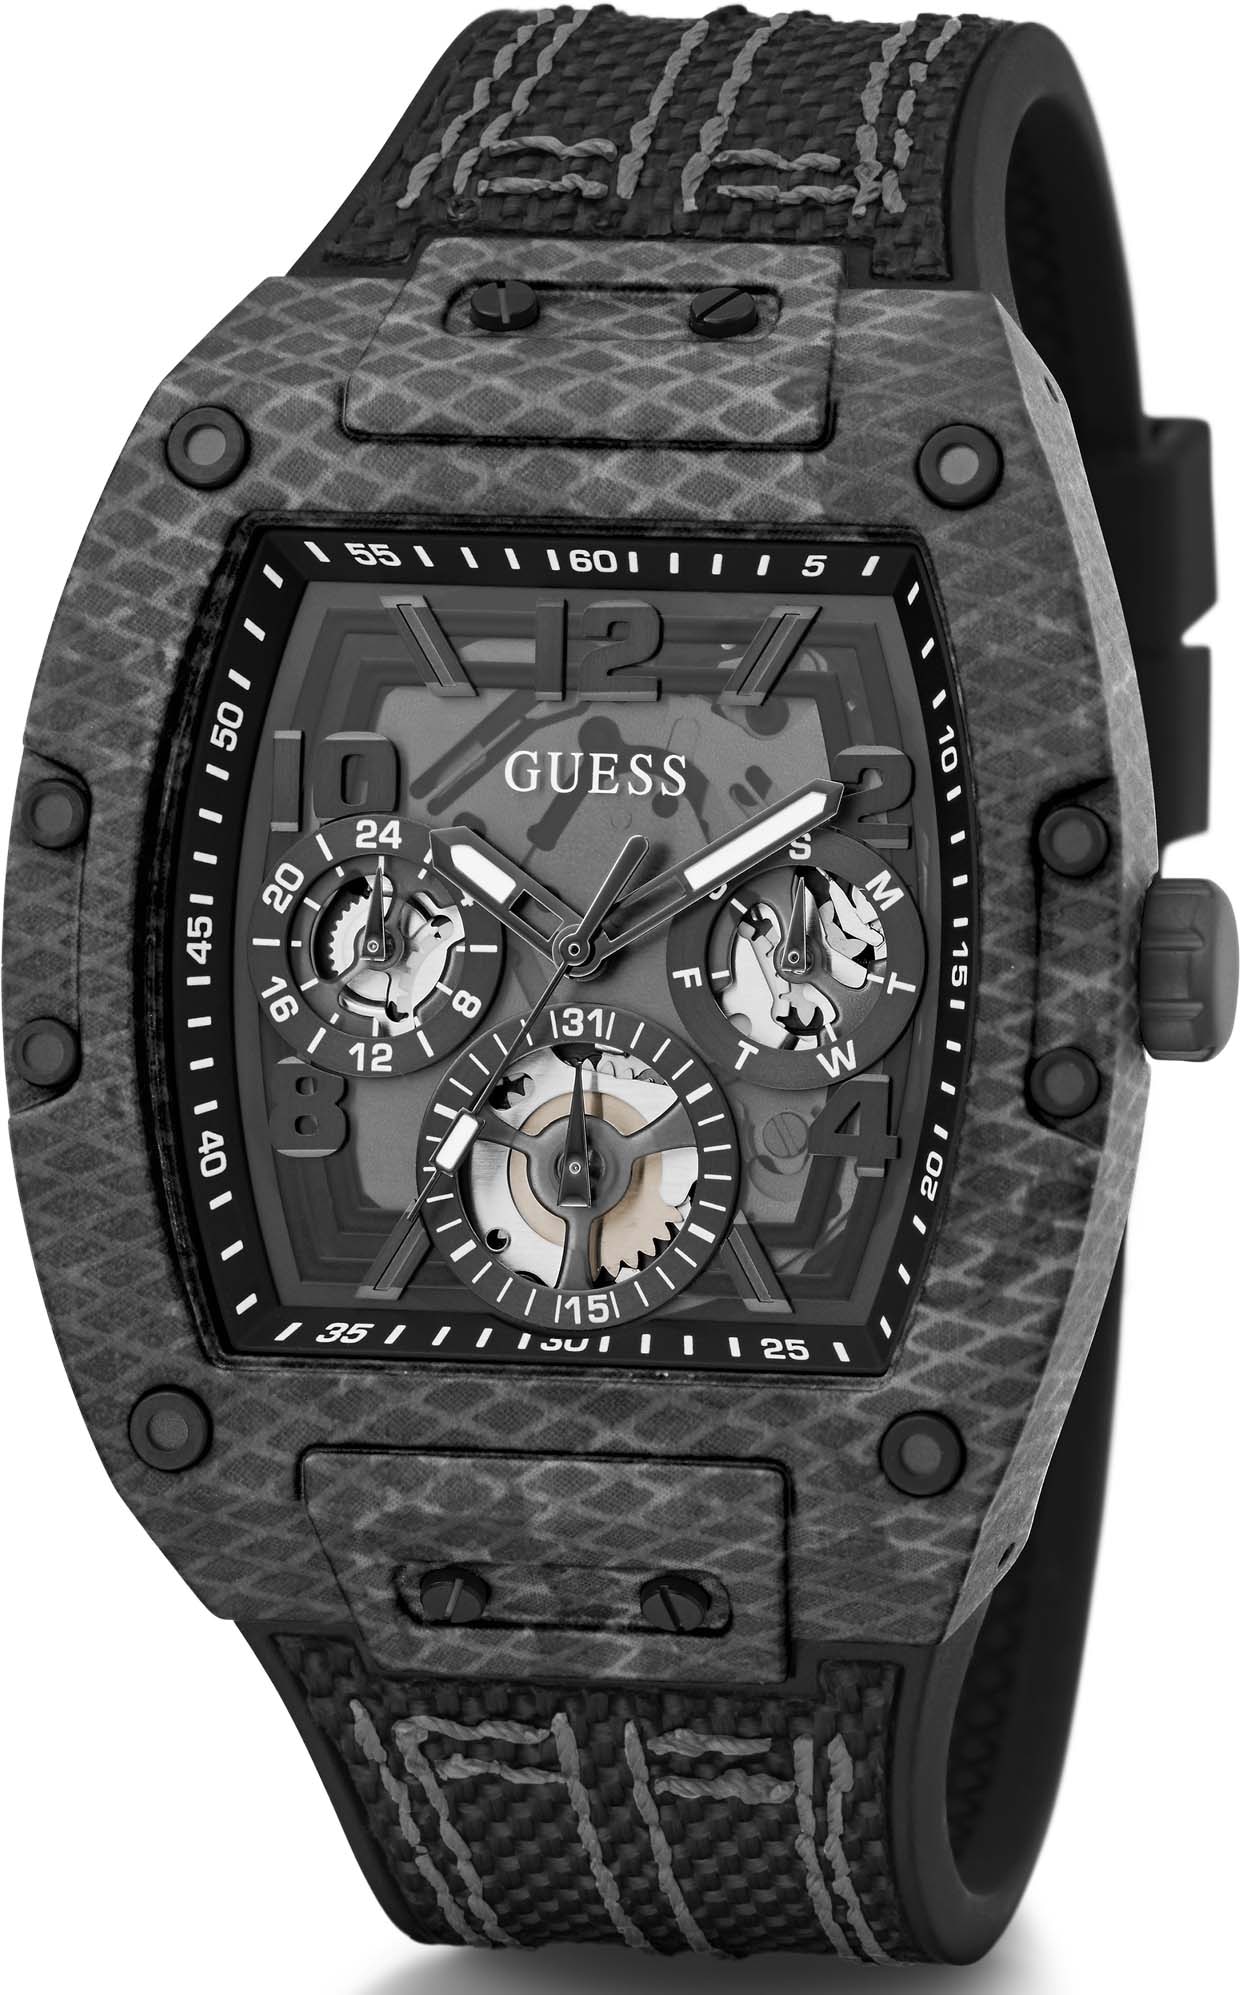 Guess Multifunktionsuhr »GW0422G2« bei ♕